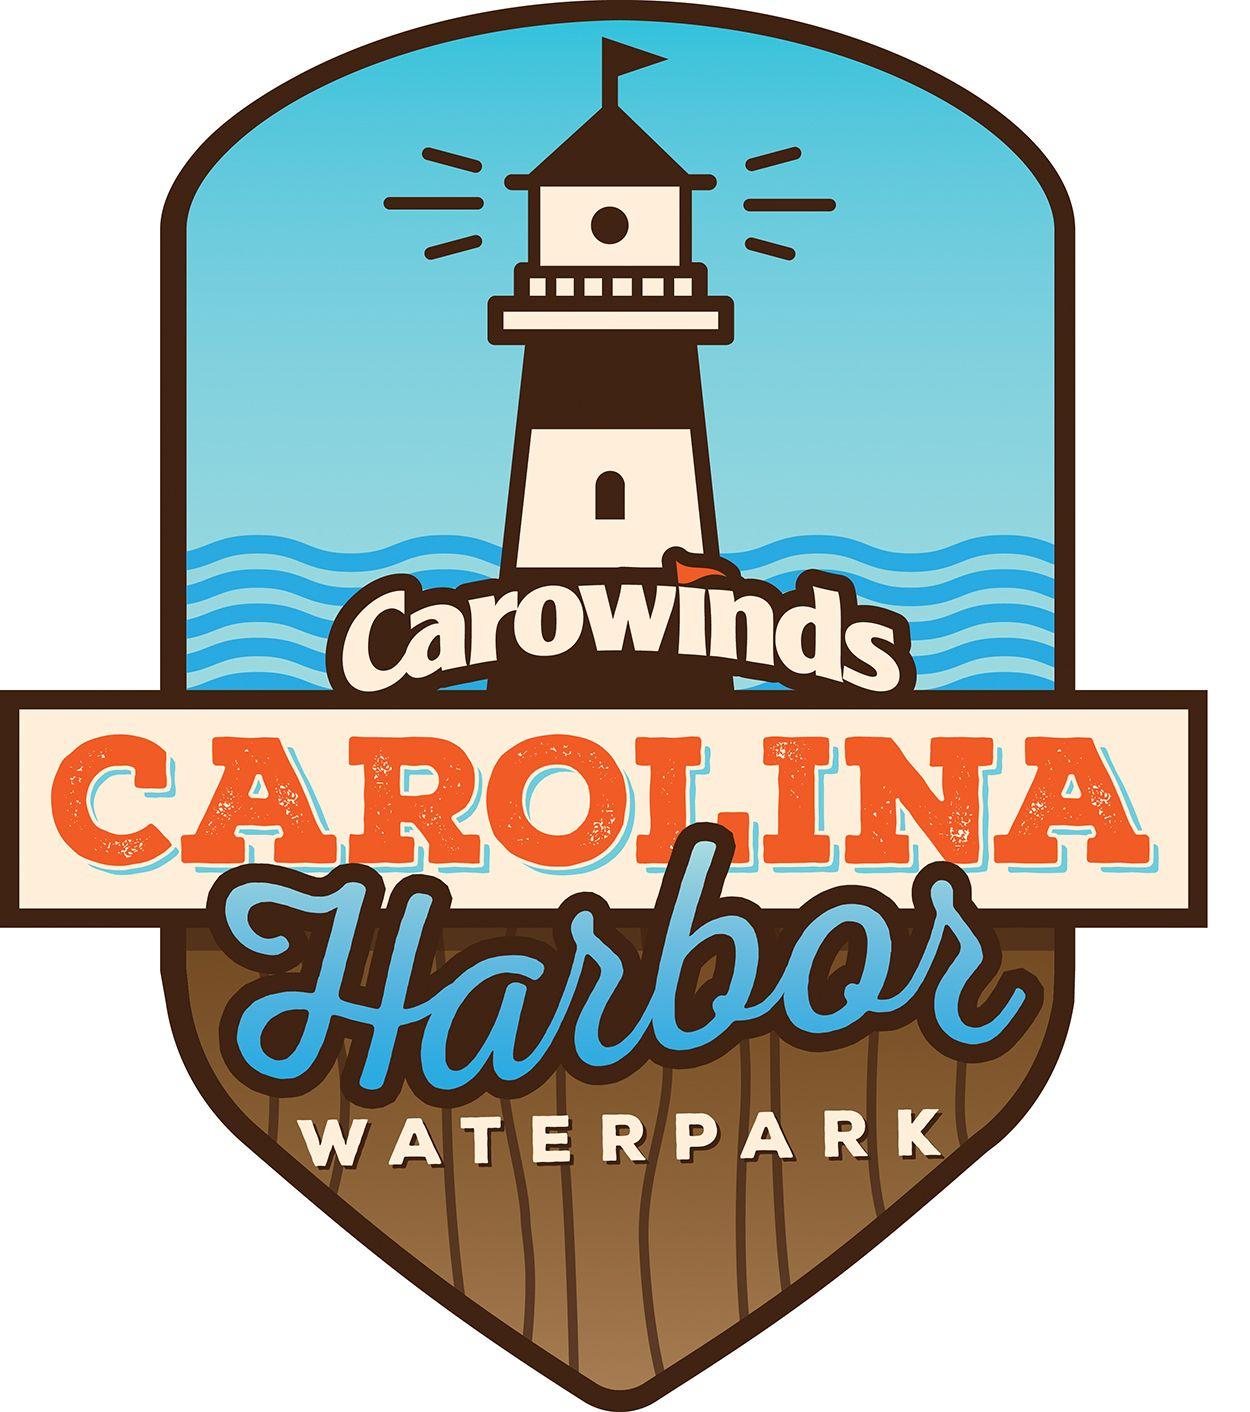 Carowinds Logo - Carowinds Announces the Largest Waterpark in the Carolinas